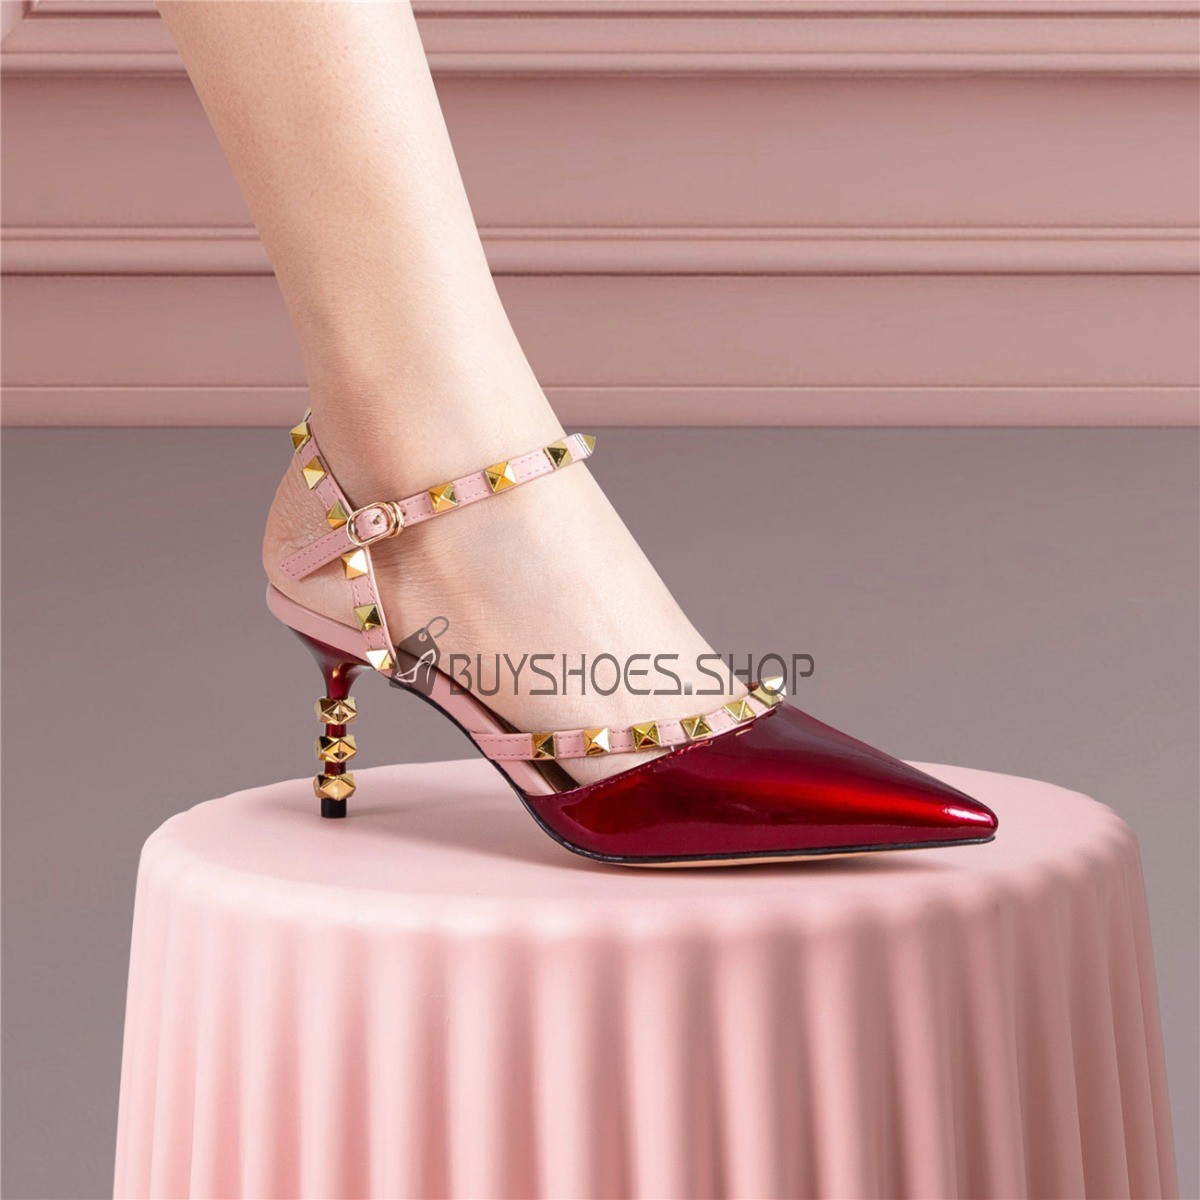 New Luxury High Heels Leather Sandal Suede Midheel 711cm Women Designer  Sandals High Heels Summer Sexy Sandals Size 3540 With B1328787 From Fgyo,  $76.47 | DHgate.Com